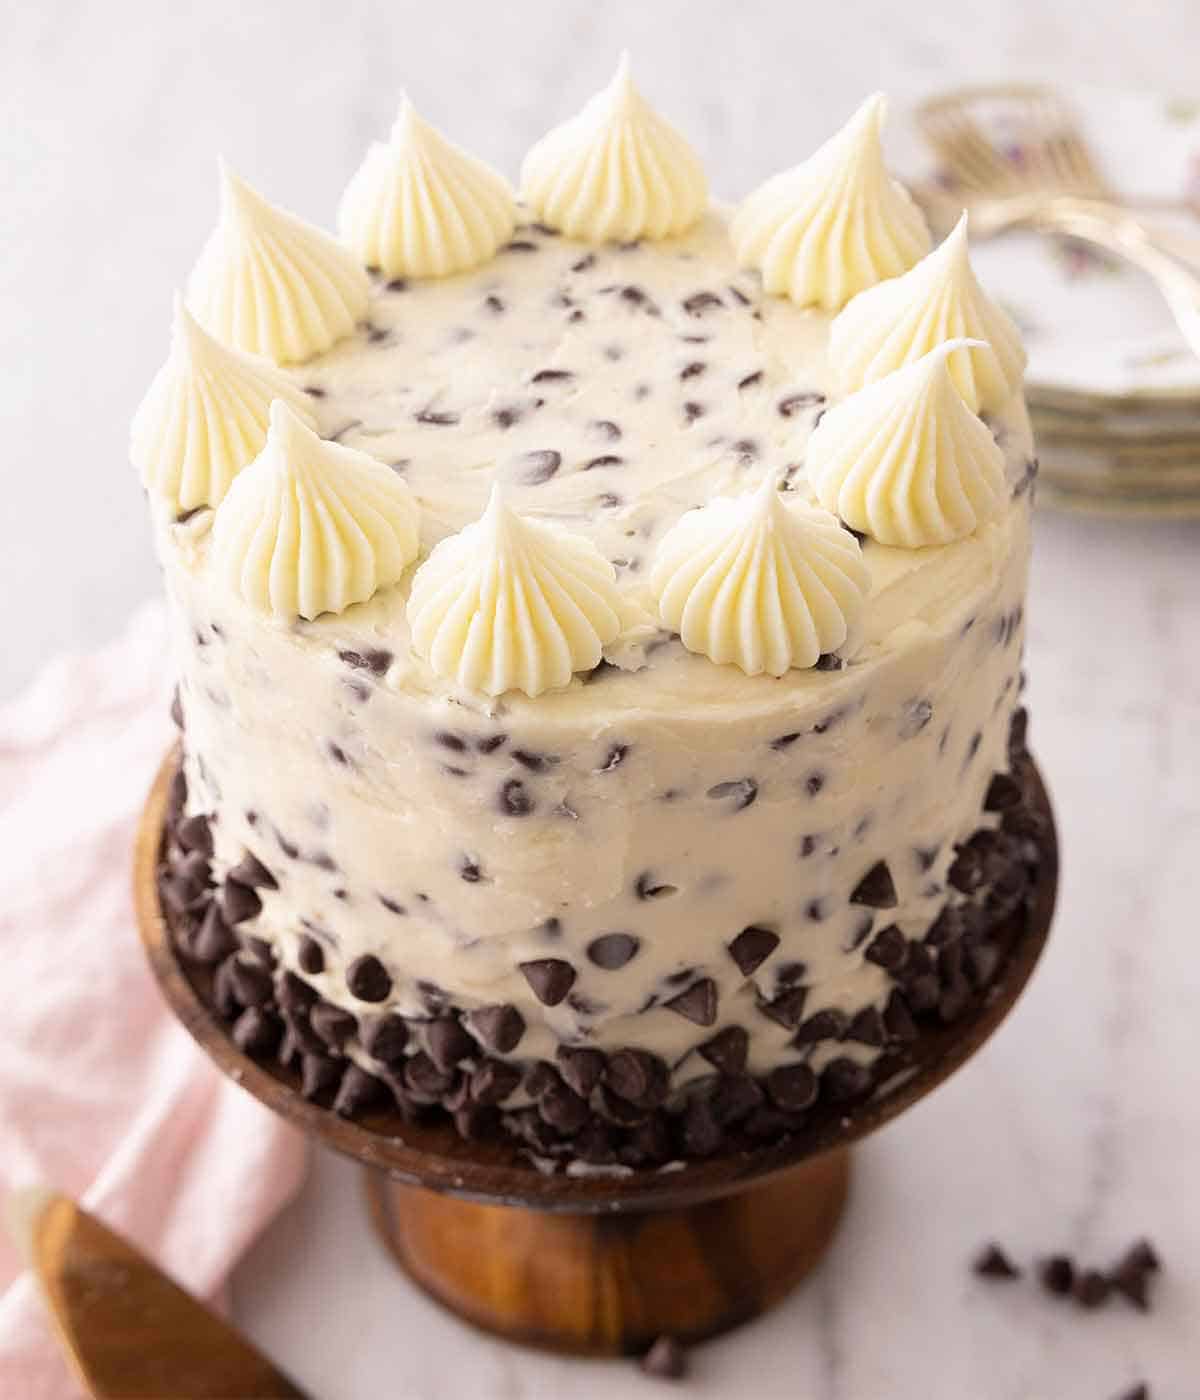 A chocolate chip cake on a brown cake stand with buttercream dollops on top.